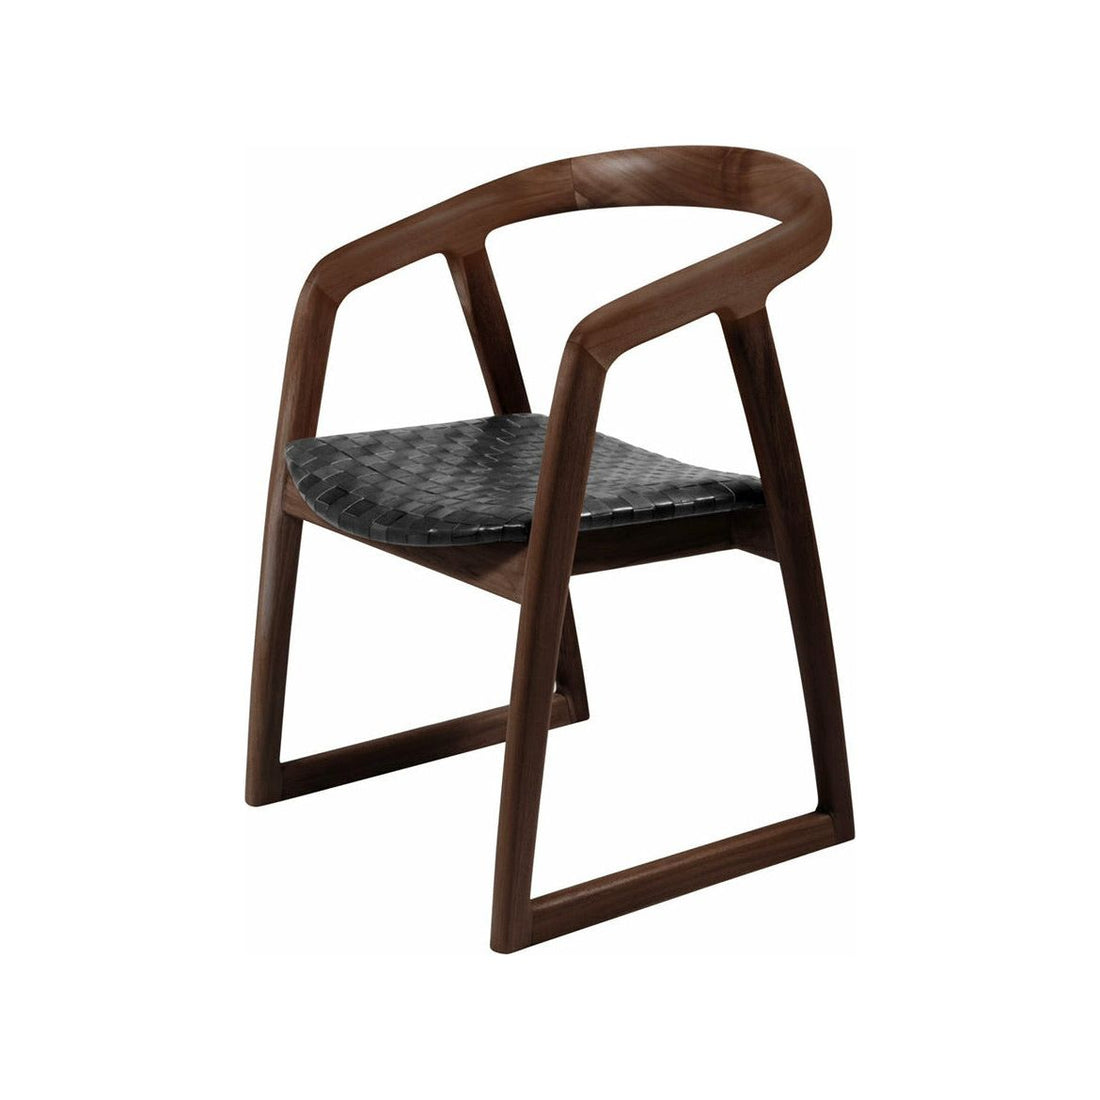 Mabel | Dining Chair Leather Black Chocolate Frame